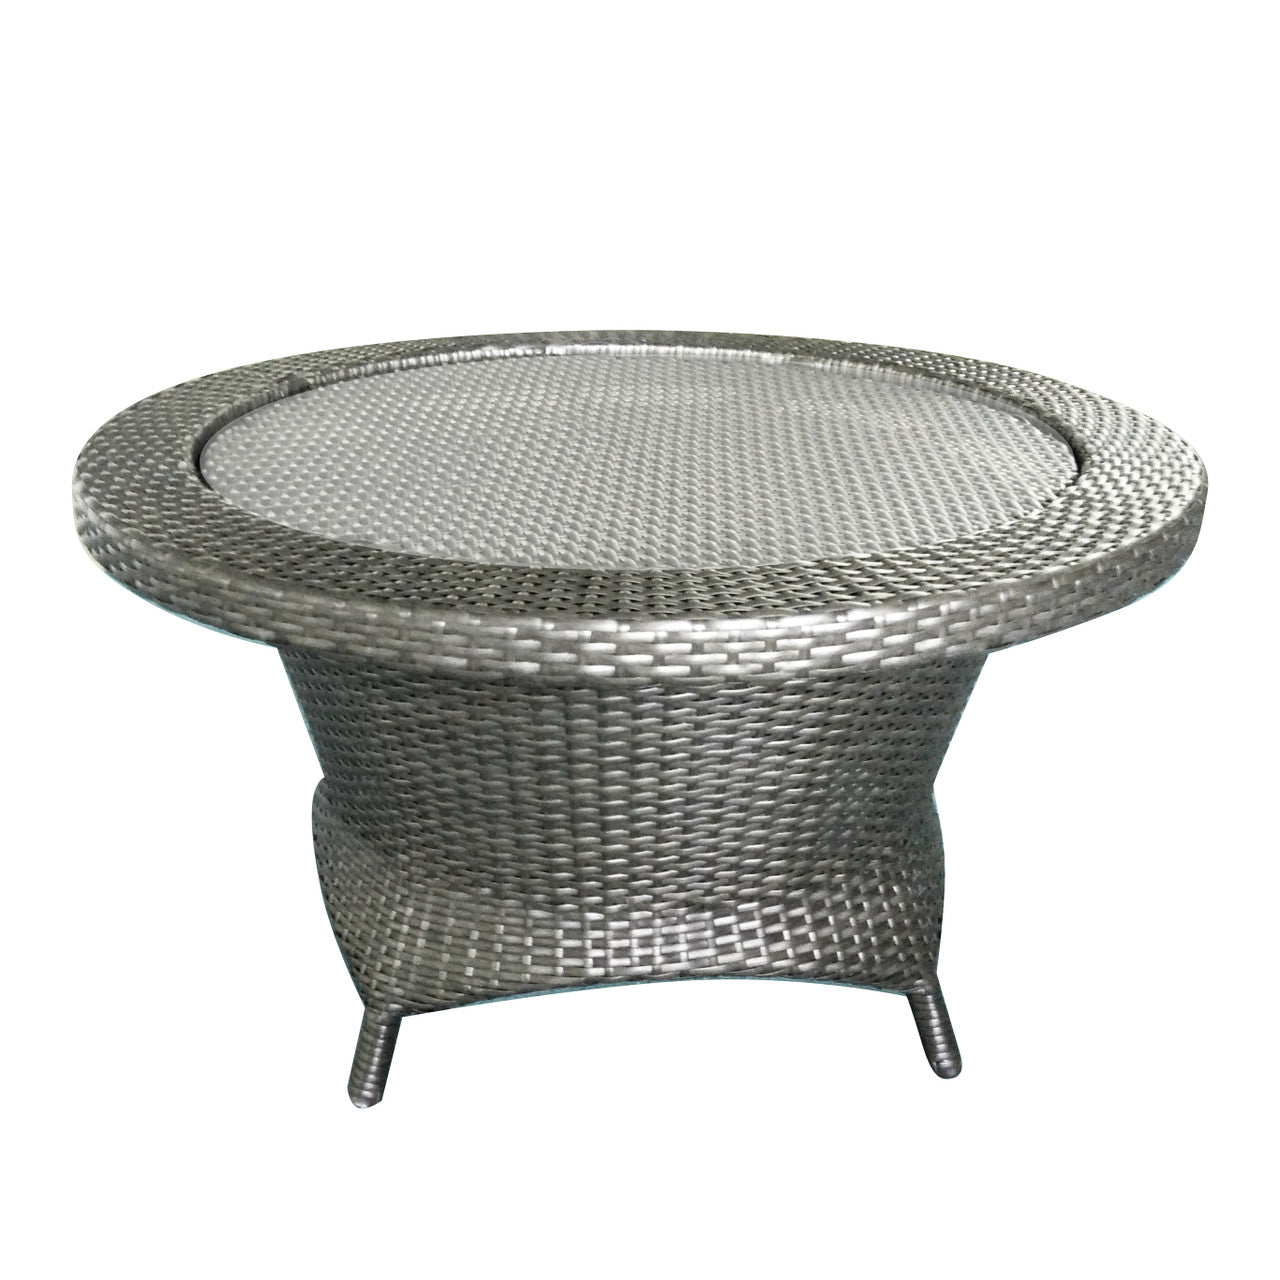 Forever Patio Universal Woven Rotating Chat Table - Flat Weave